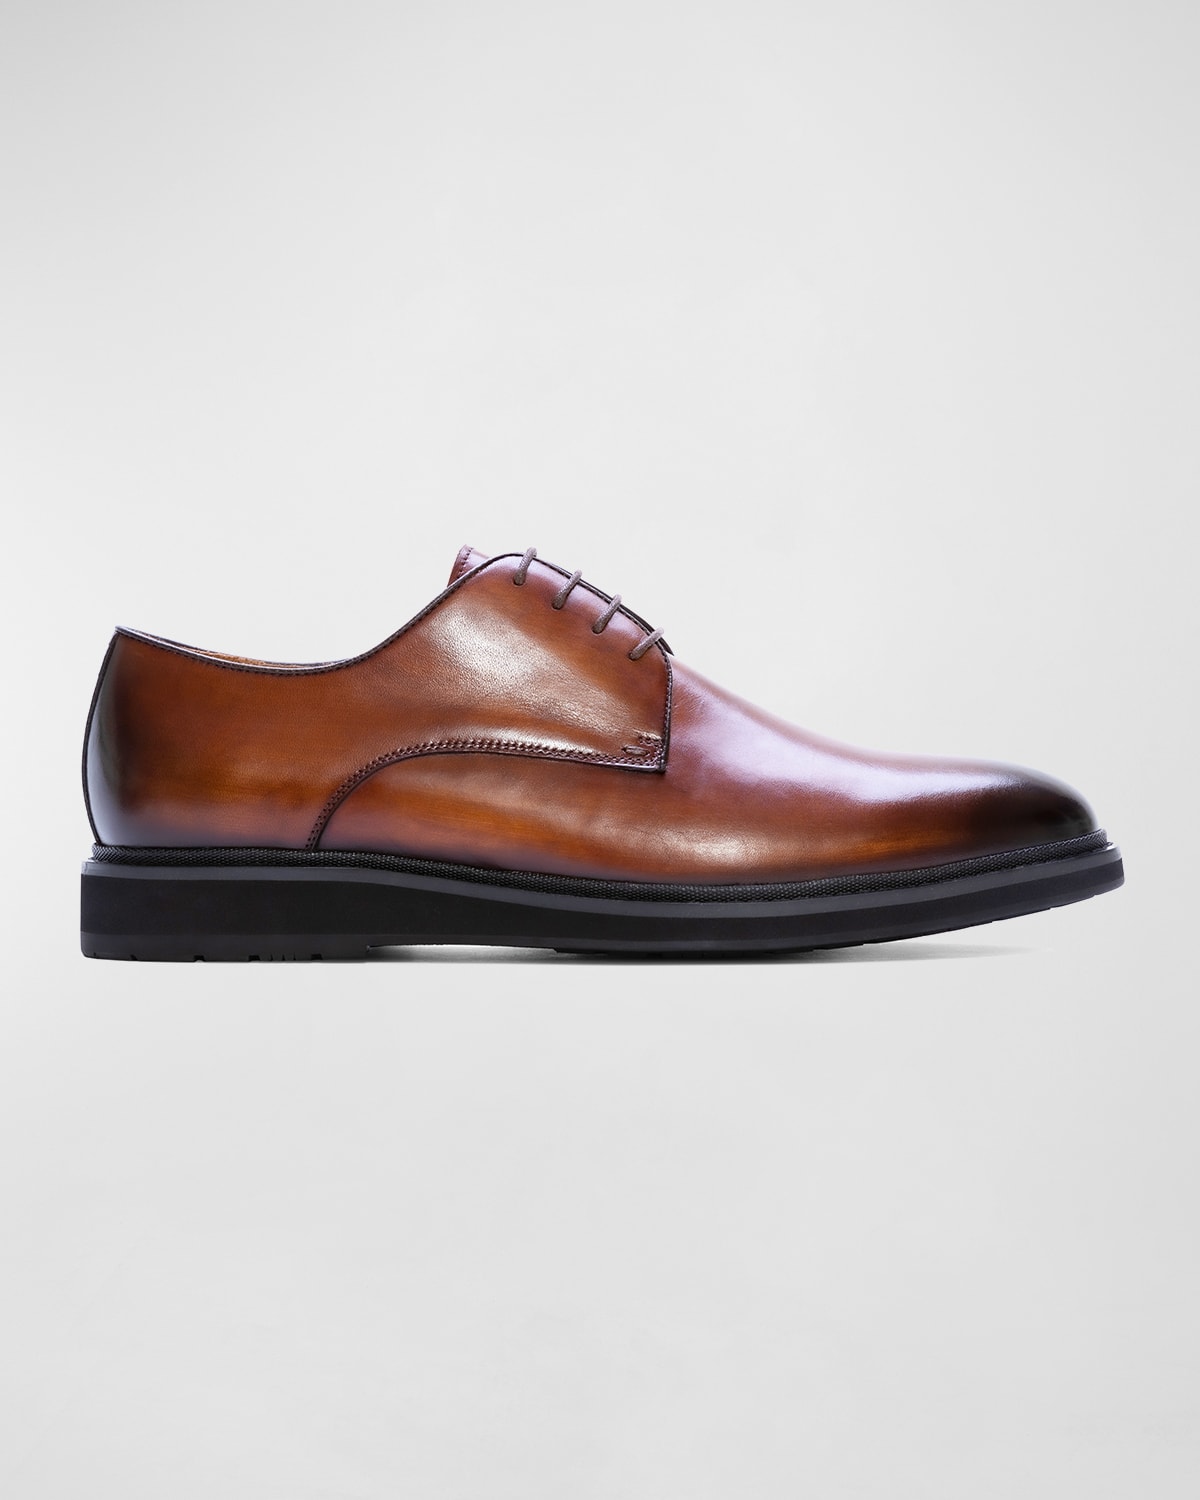 Ike Behar Men's Concord Leather Derby Shoes